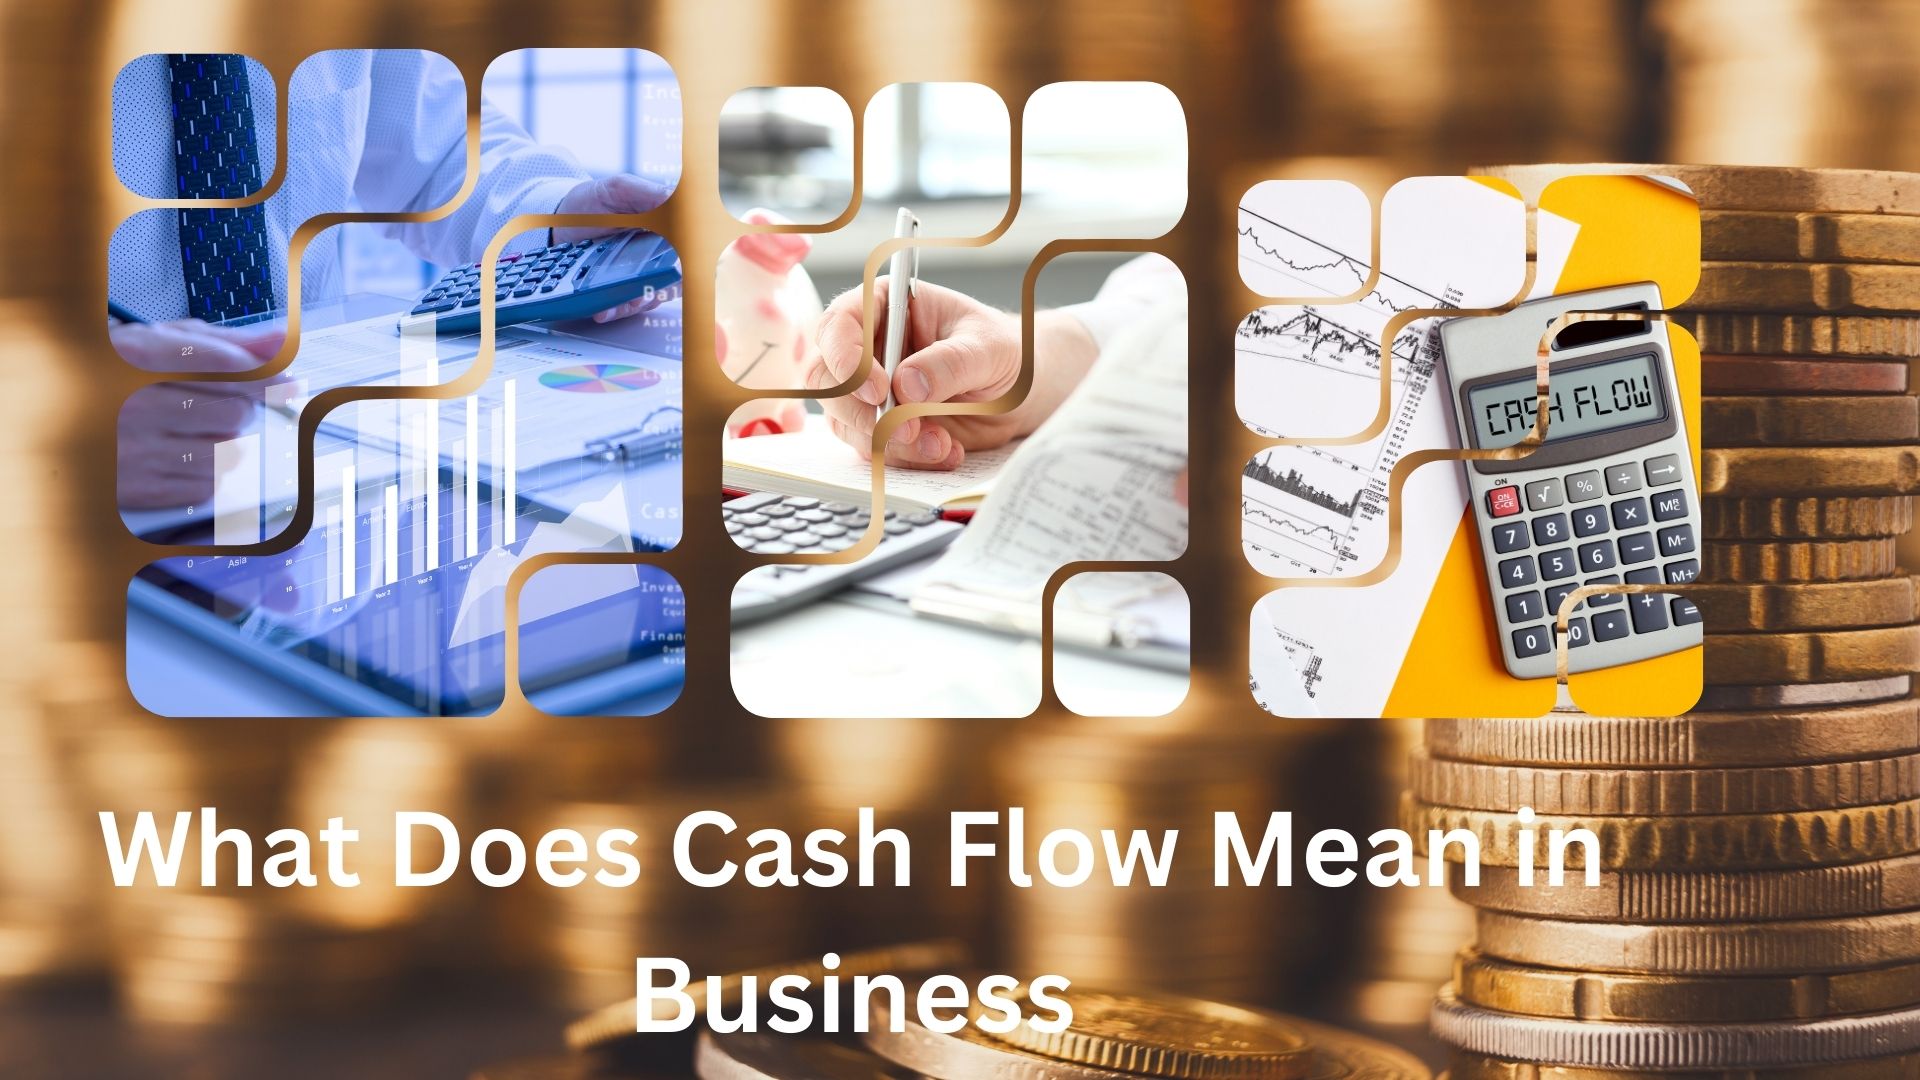 What Does Cash Flow Mean in Business